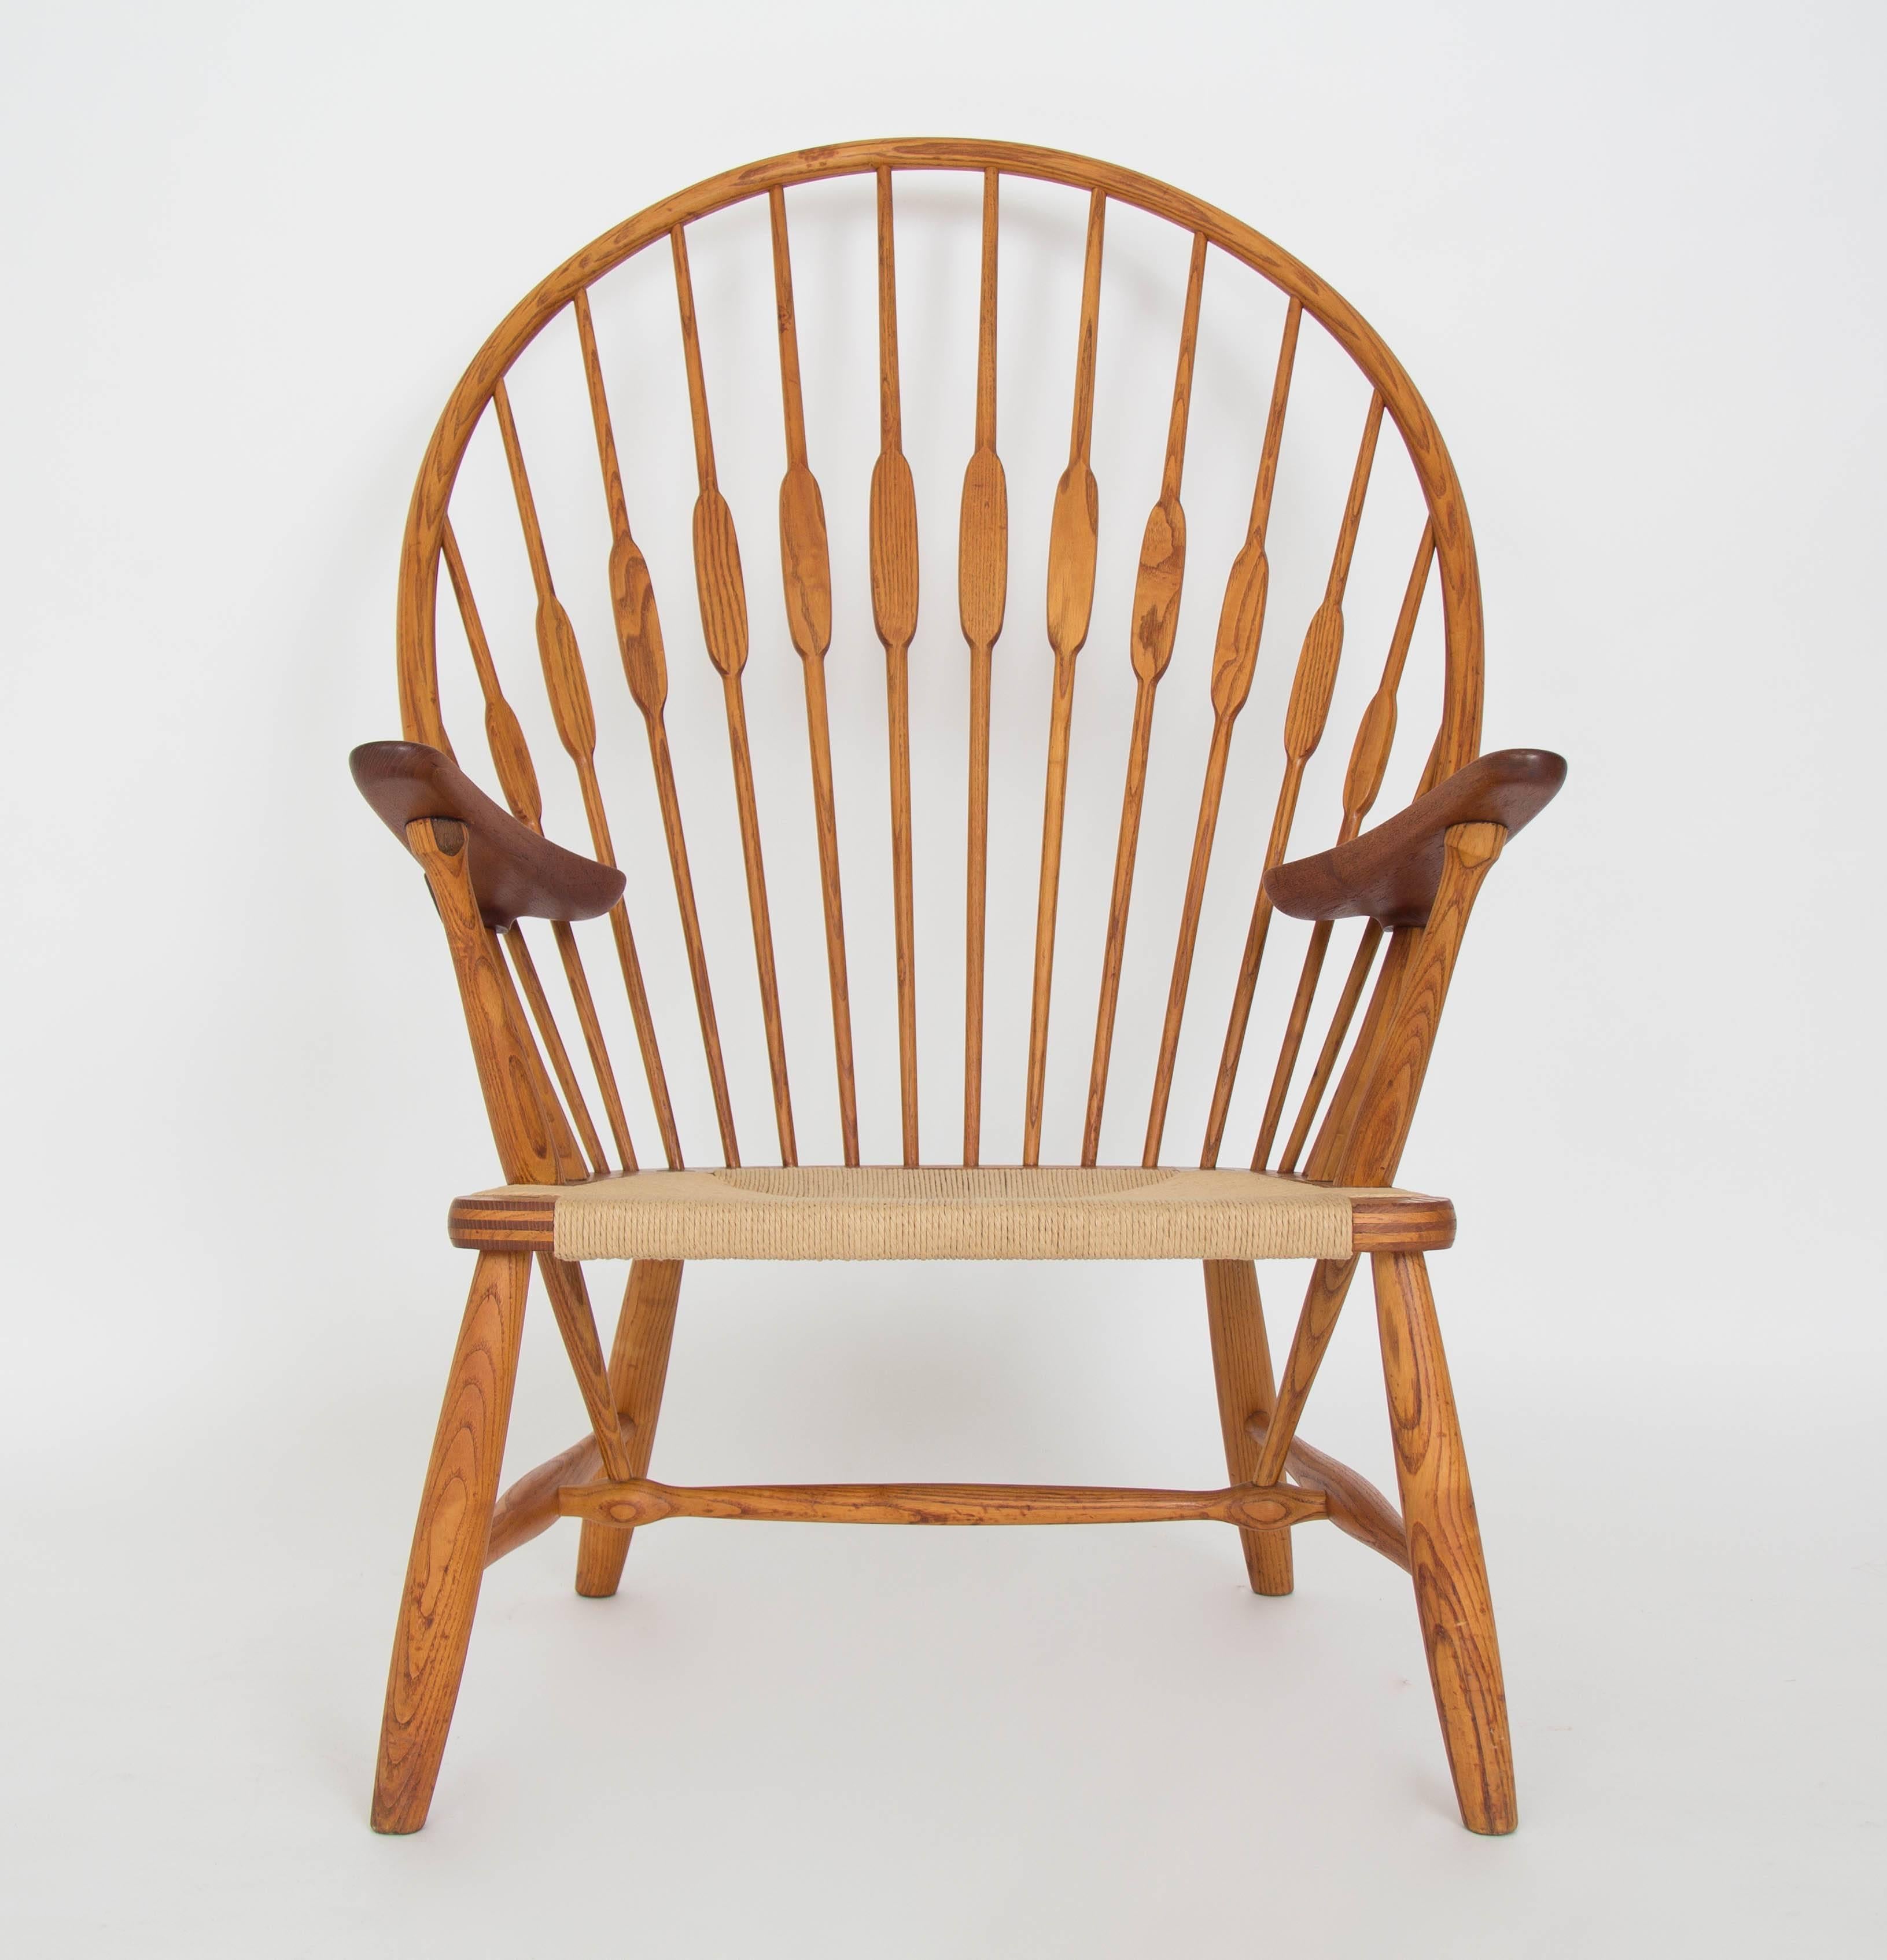 Designed in 1947, this fully restored Hans Wegner peacock chair features windsor chair styling and characteristic attention to detail. The solid wood frame has a high, arched back strung with round wooden supports that flatten where the chair meets